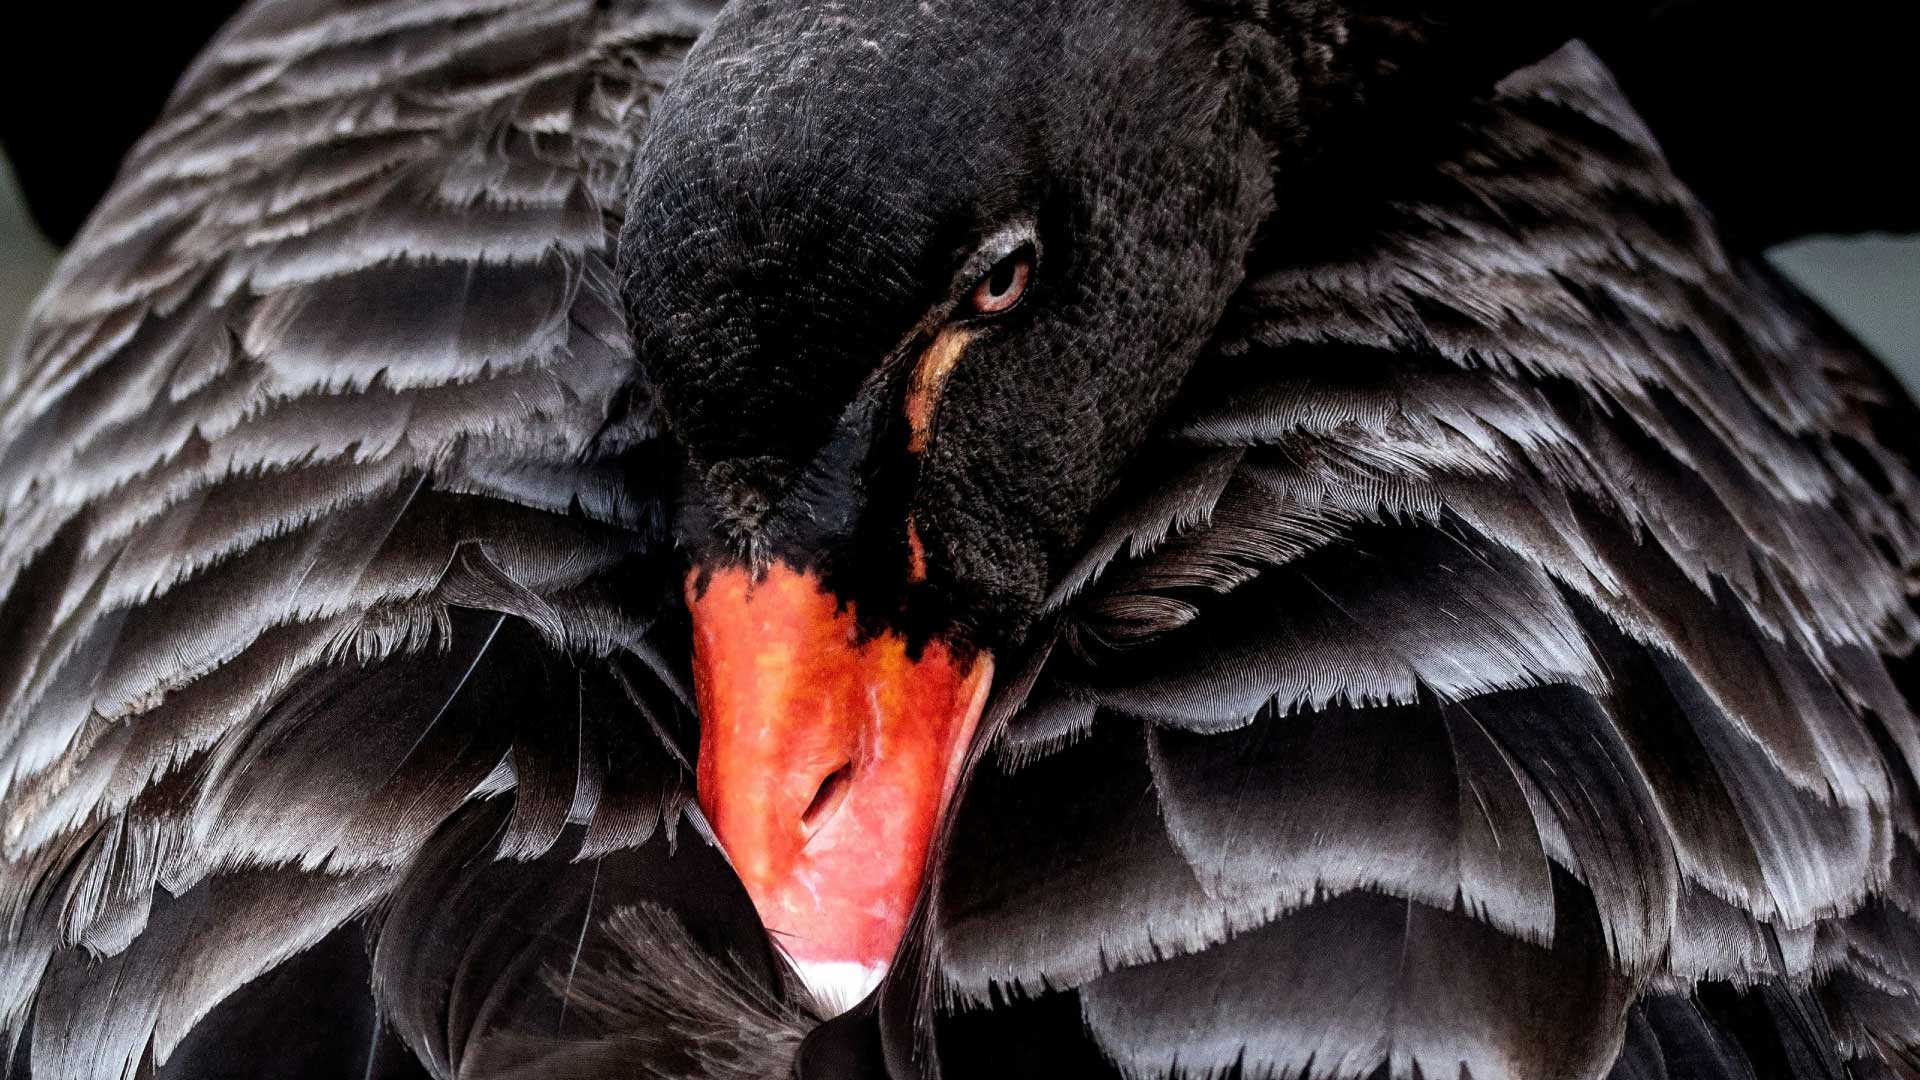 Close-up photo of a black swan's head nestled in it's feathers. Photo by David Clode on Unsplash